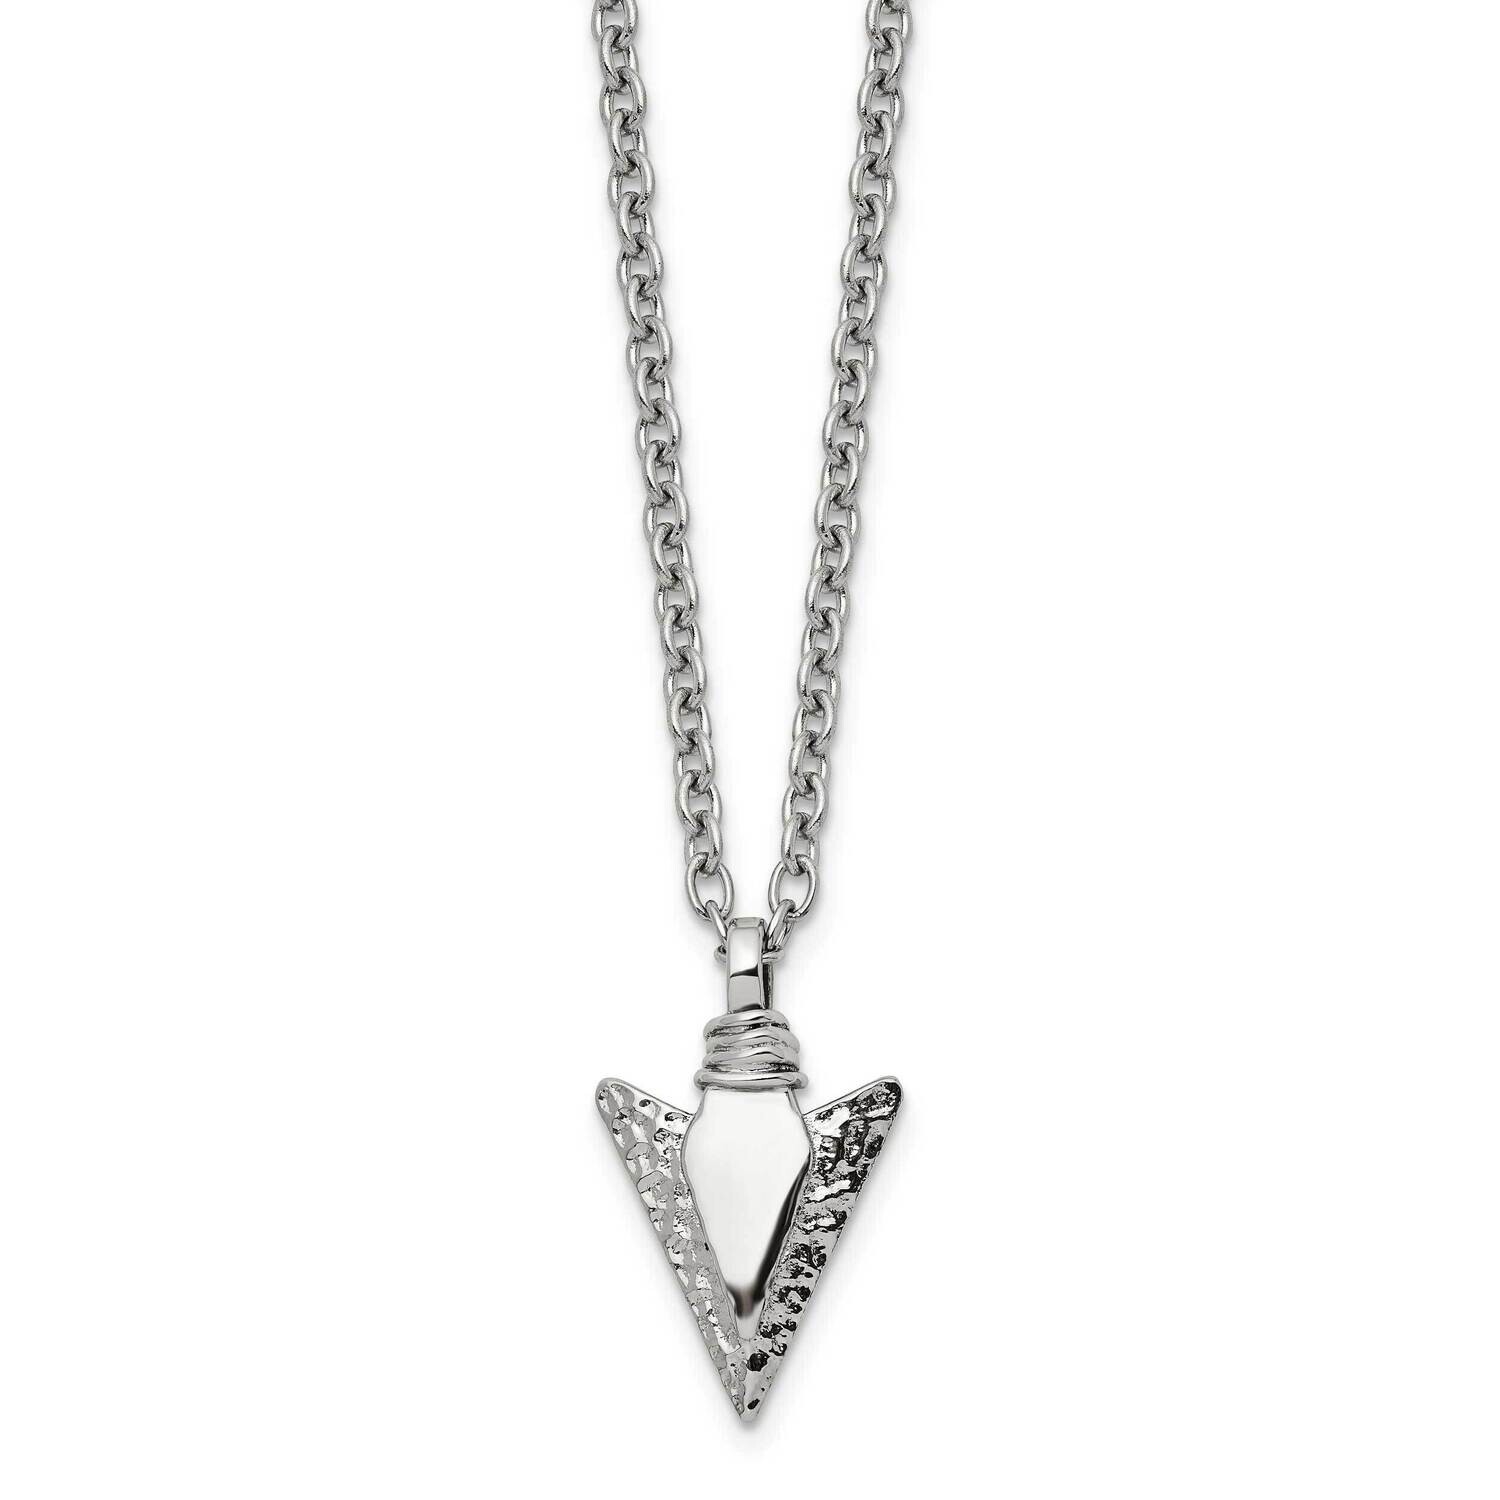 Chisel Brushed Polished Arrowhead Pendant On A 19.5 Inch .75 Inch Extension Cable Chain Necklace Stainless Steel SRN3026-19.5